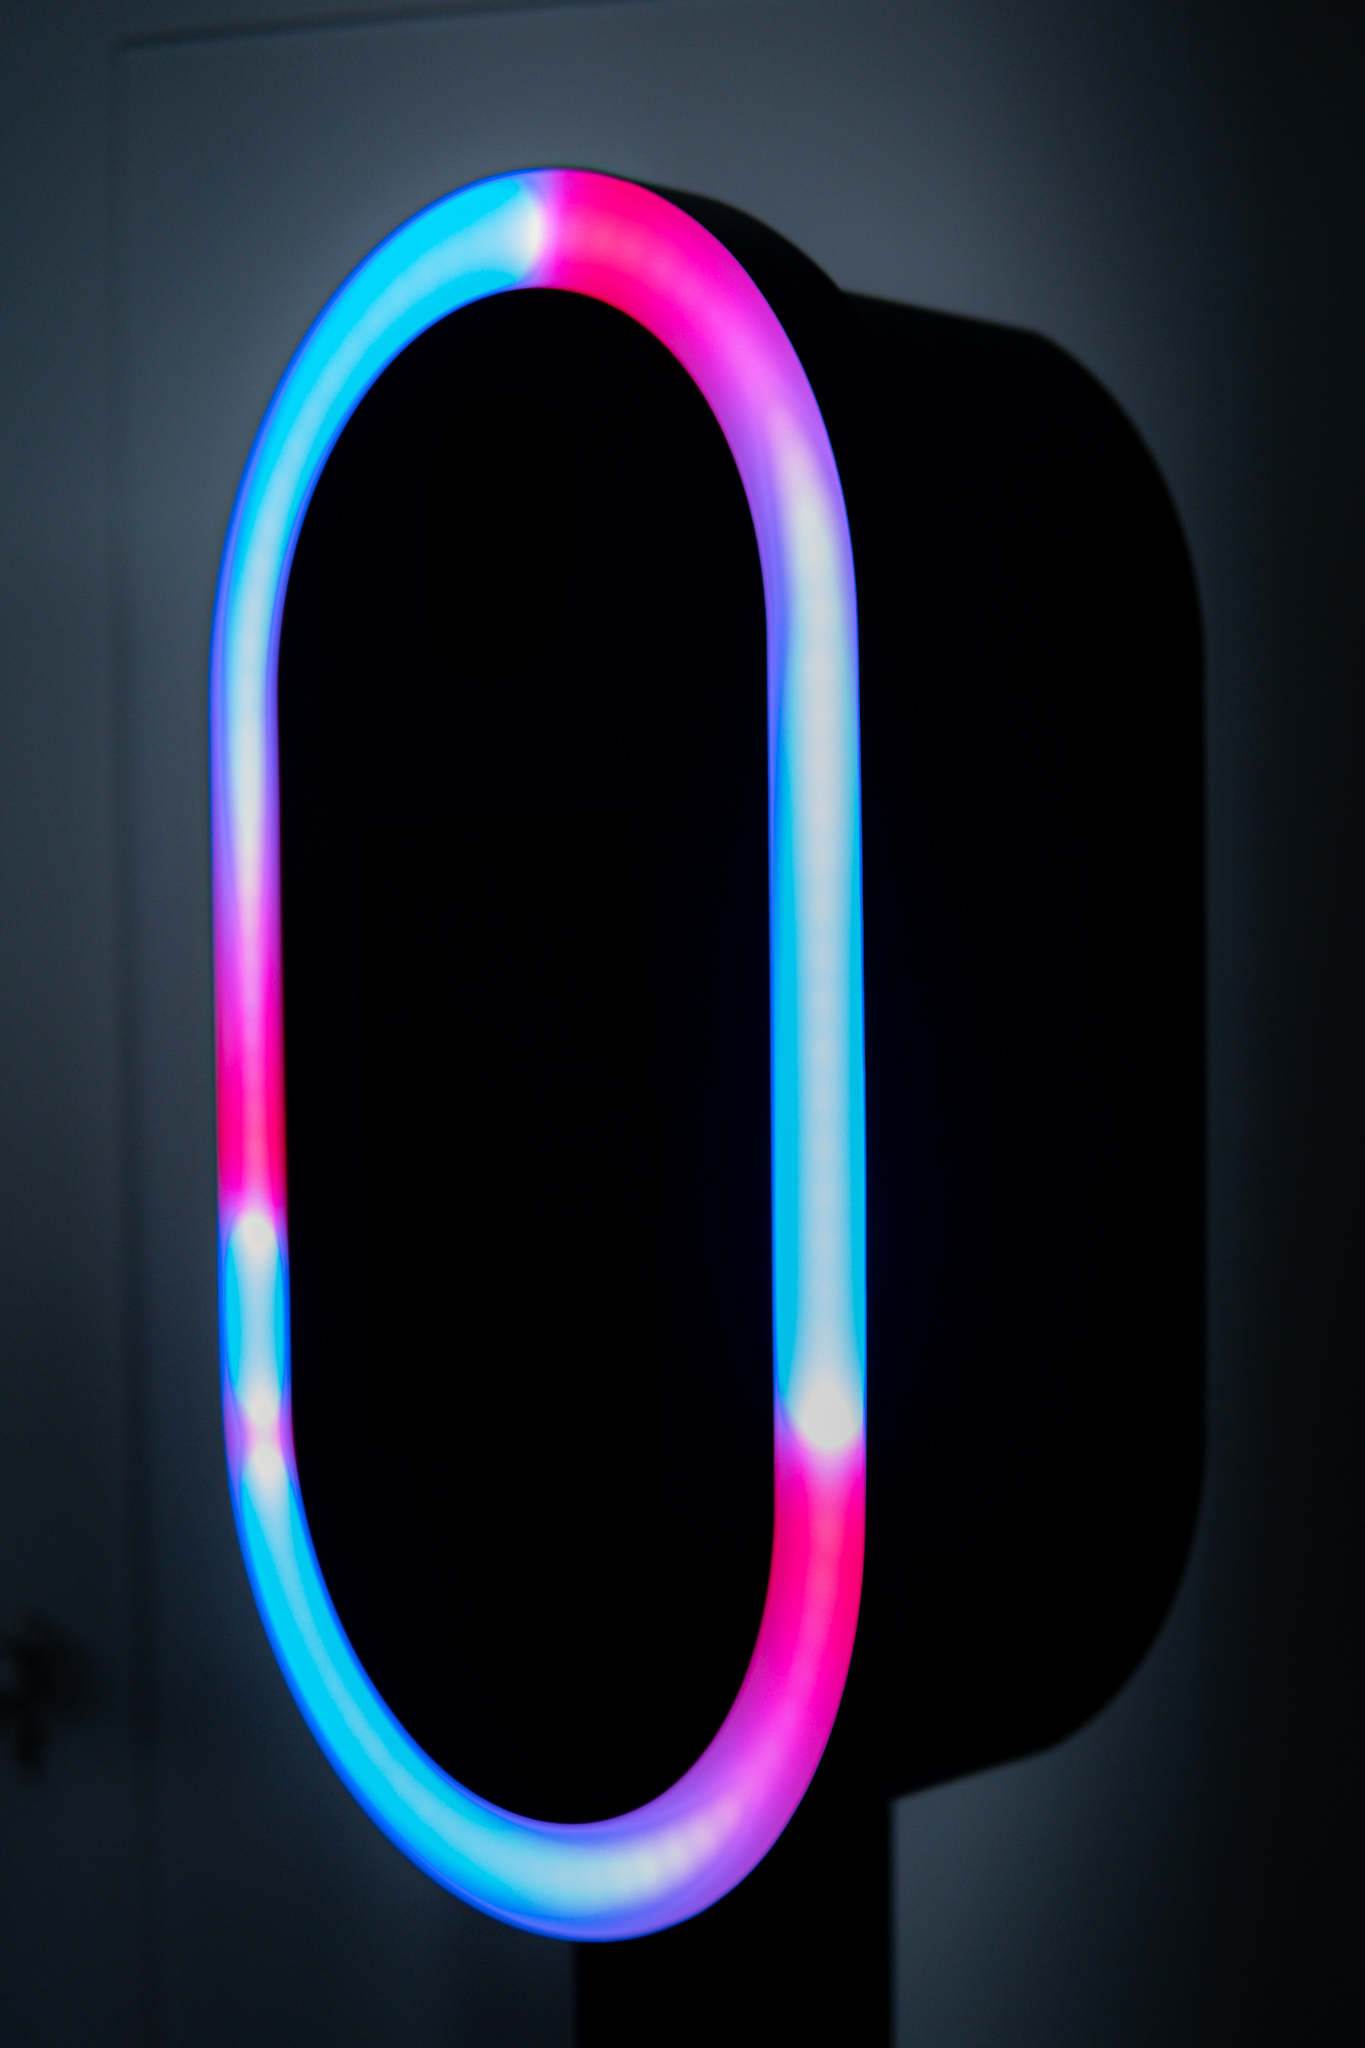 Illuminated mirror with a glowing frame displaying gradients of blue, pink, and purple colors against a dark background.